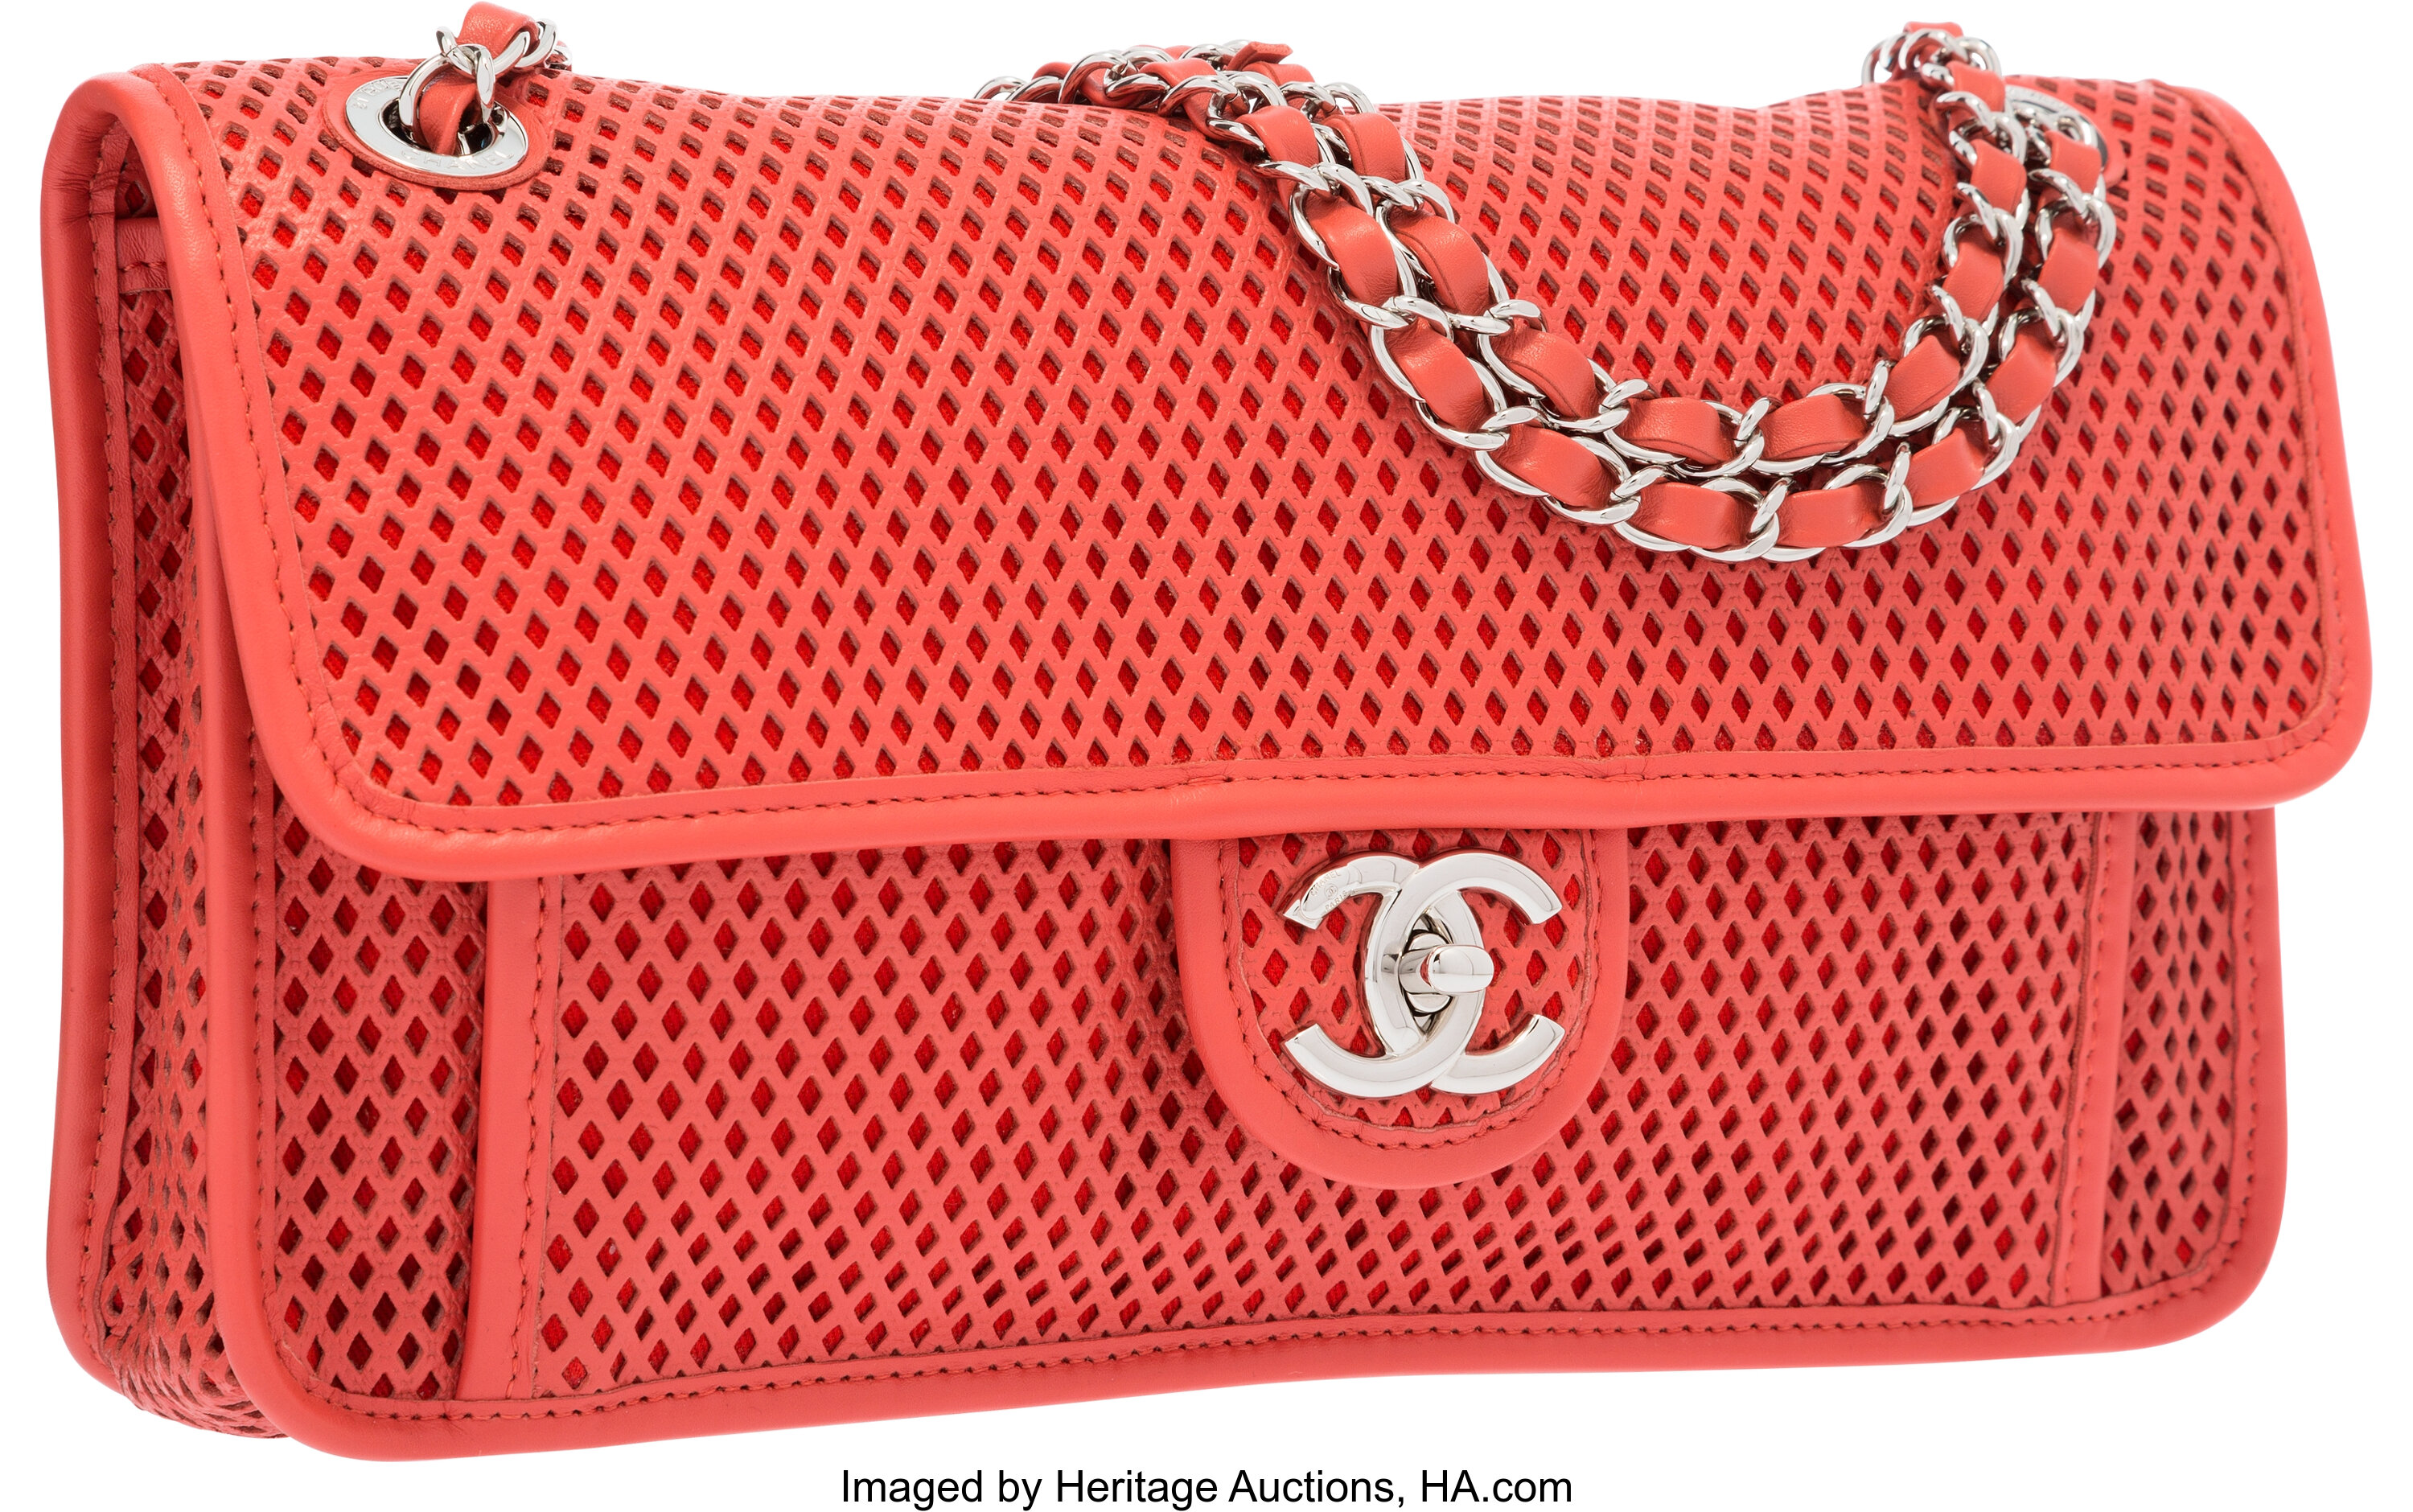 Chanel Red Perforated Lambskin Leather Up in the Air Flap Bag with